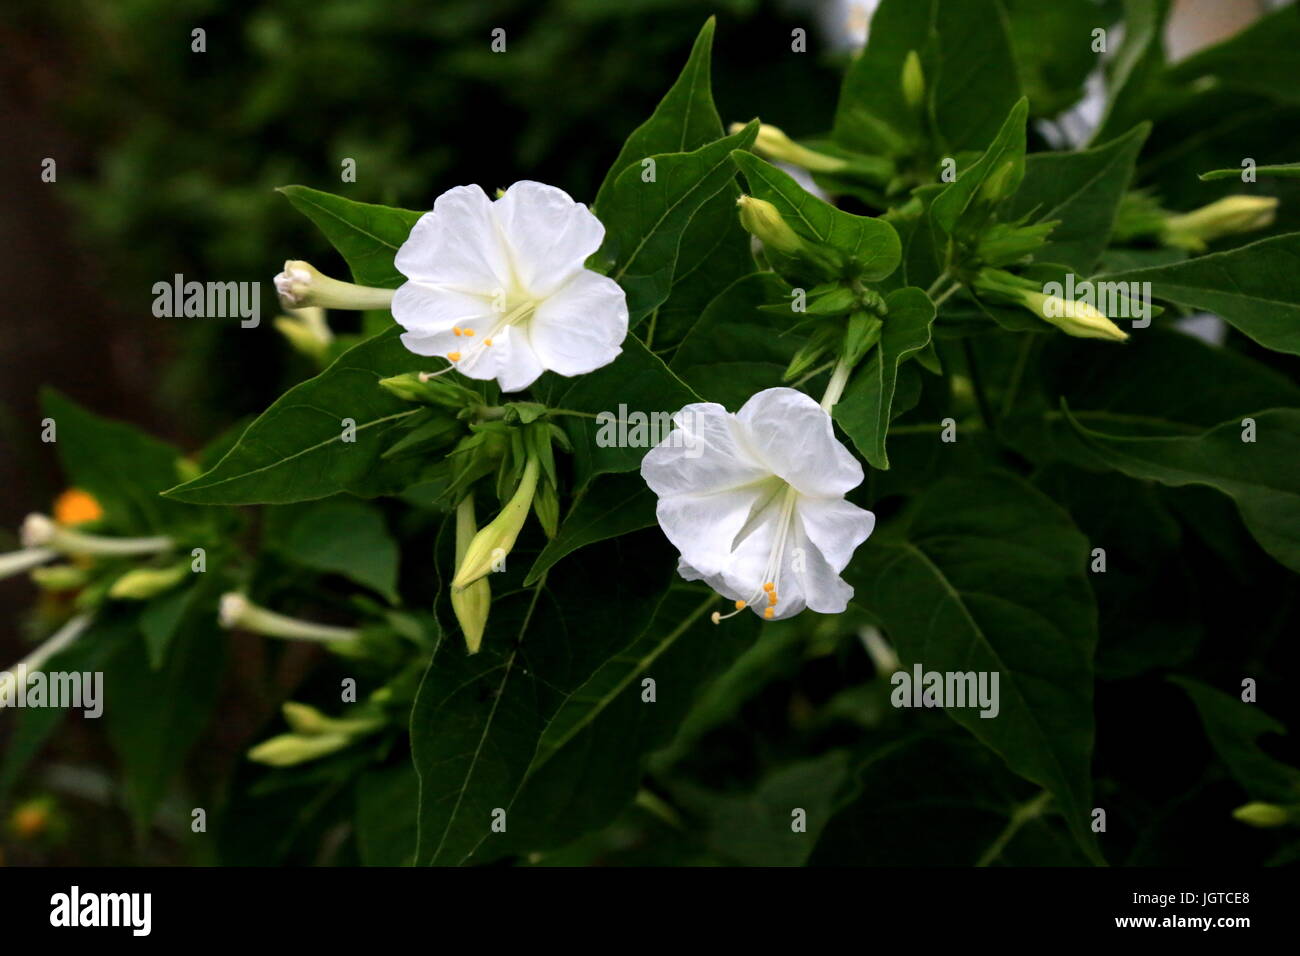 Wild lillies bloom along the road. Stock Photo